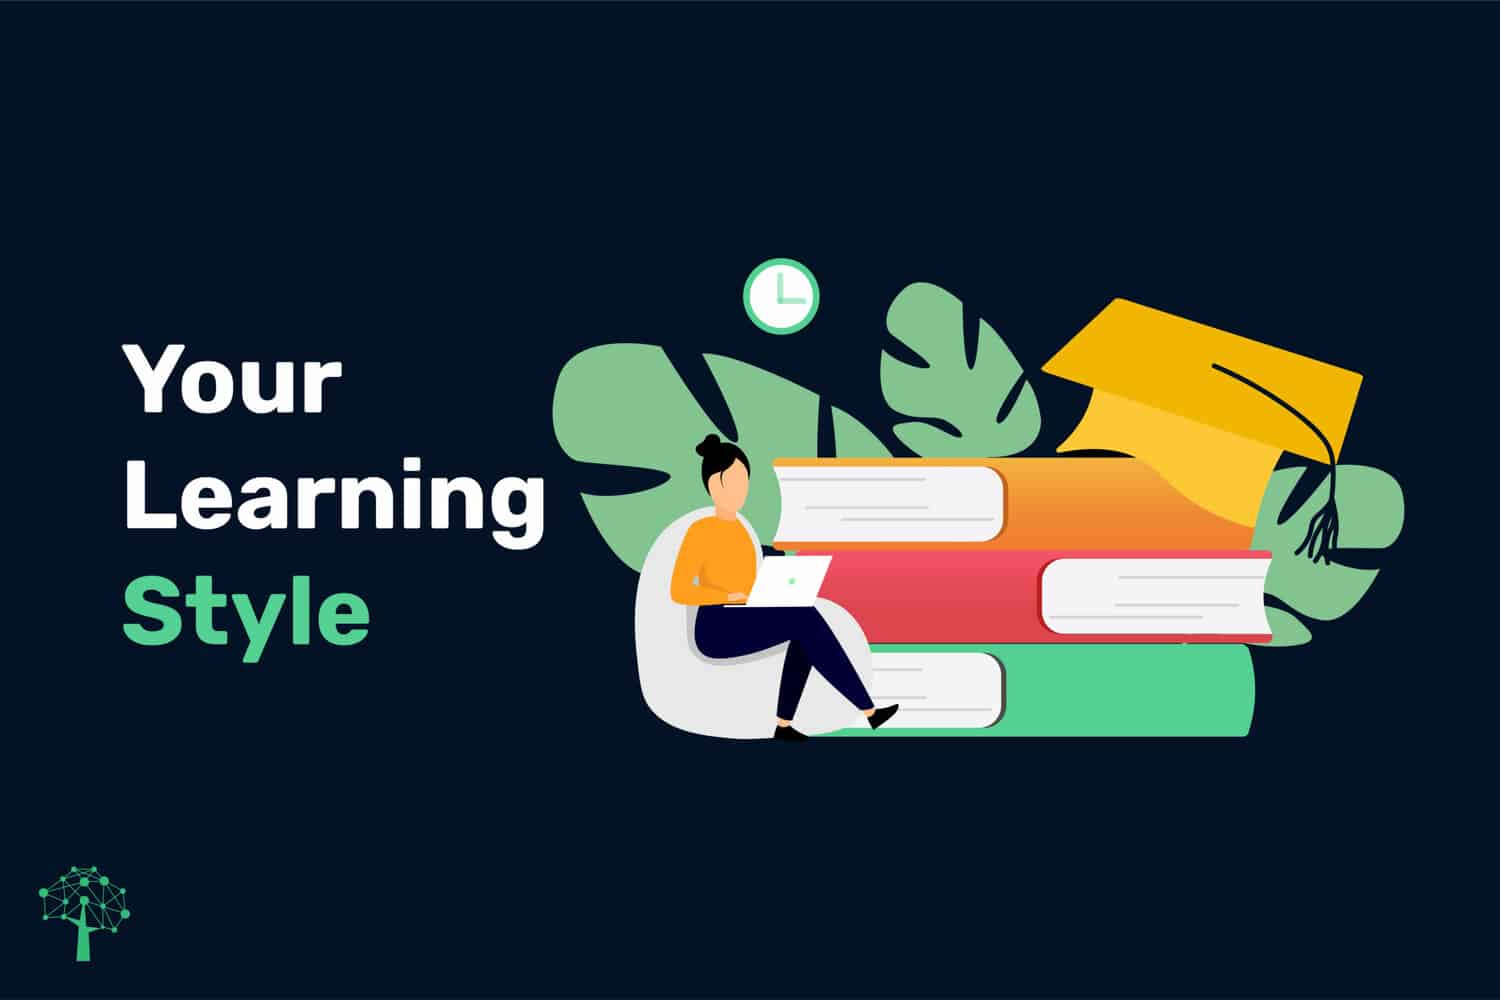 Your Learning Style